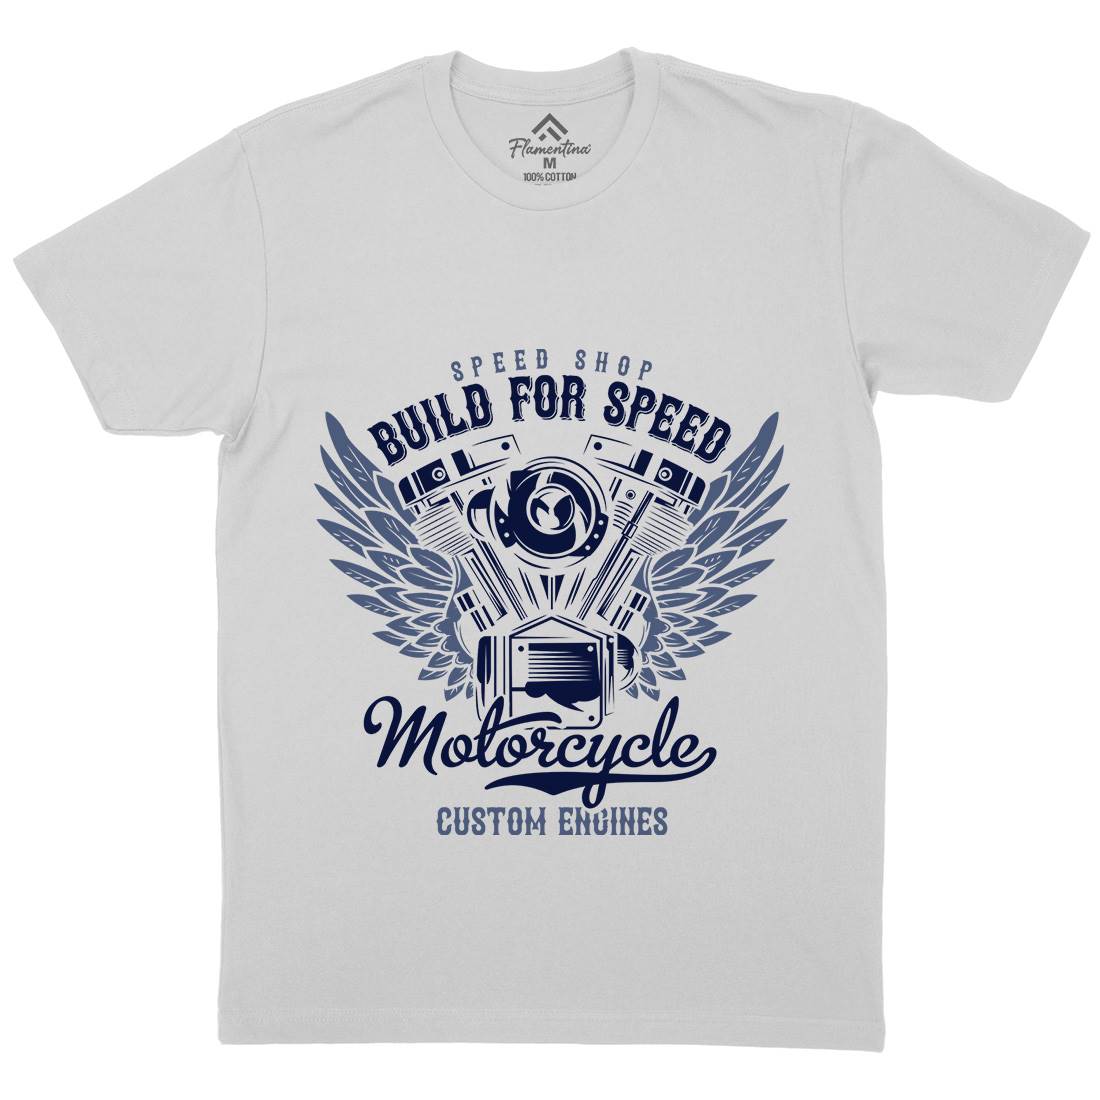 Build For Speed Mens Crew Neck T-Shirt Motorcycles B842